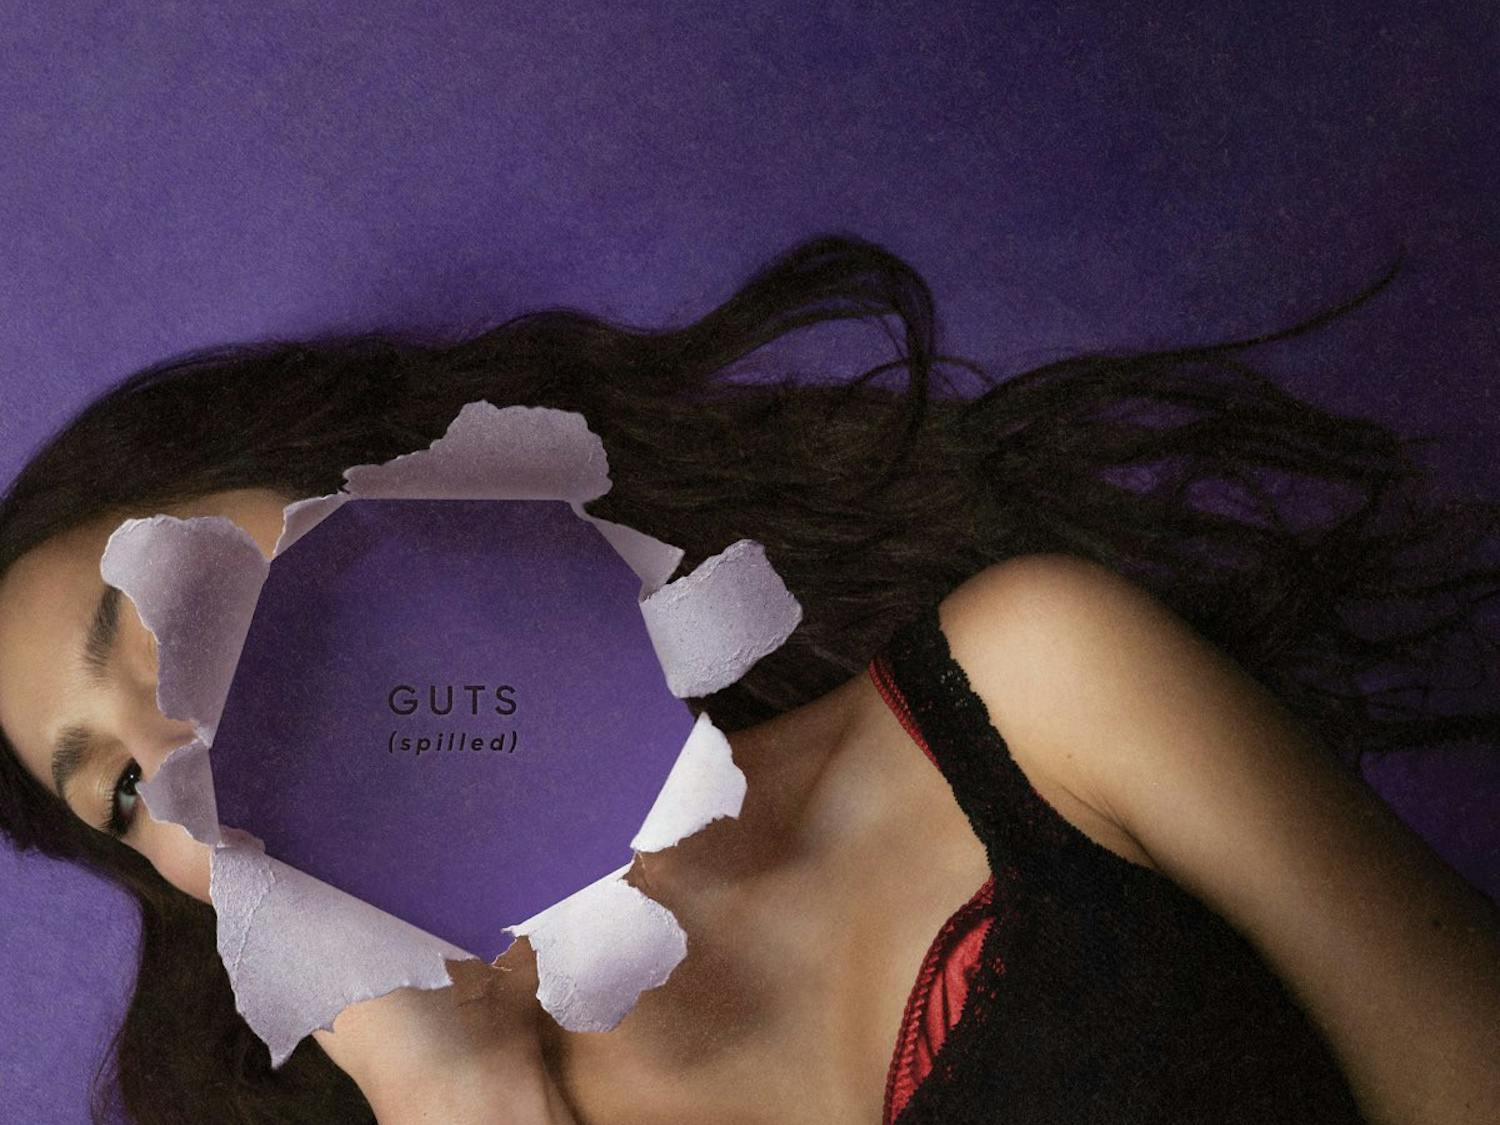 Olivia Rodrigo was not done spilling her guts and has released a deluxe version of “GUTS,” featuring five new tracks. (Photo courtesy of Apple Music)